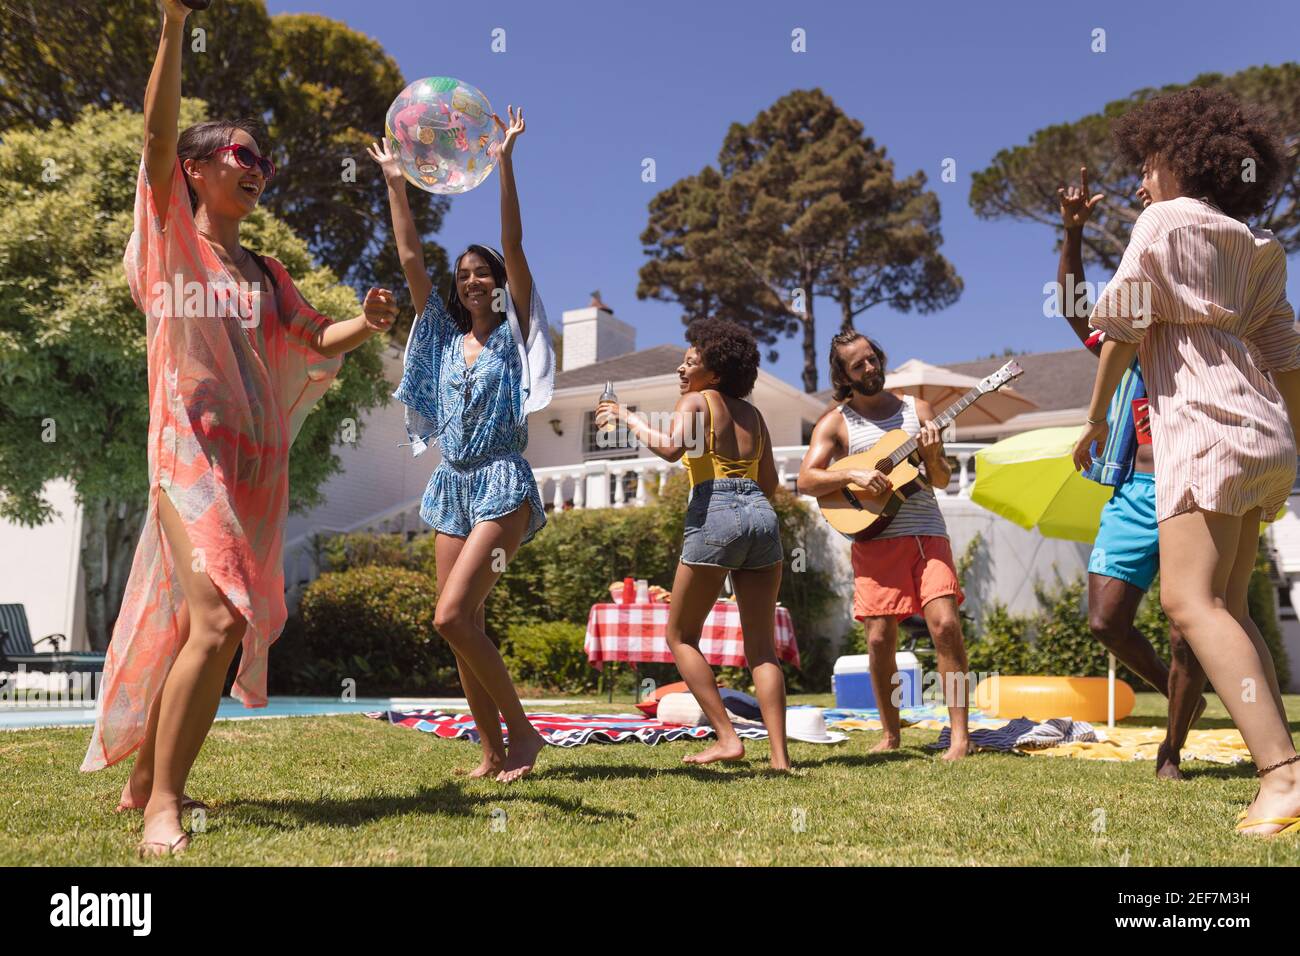 Diverse group of friends dancing and smiling at a pool party. Hanging out and relaxing outdoors in summer. Stock Photo